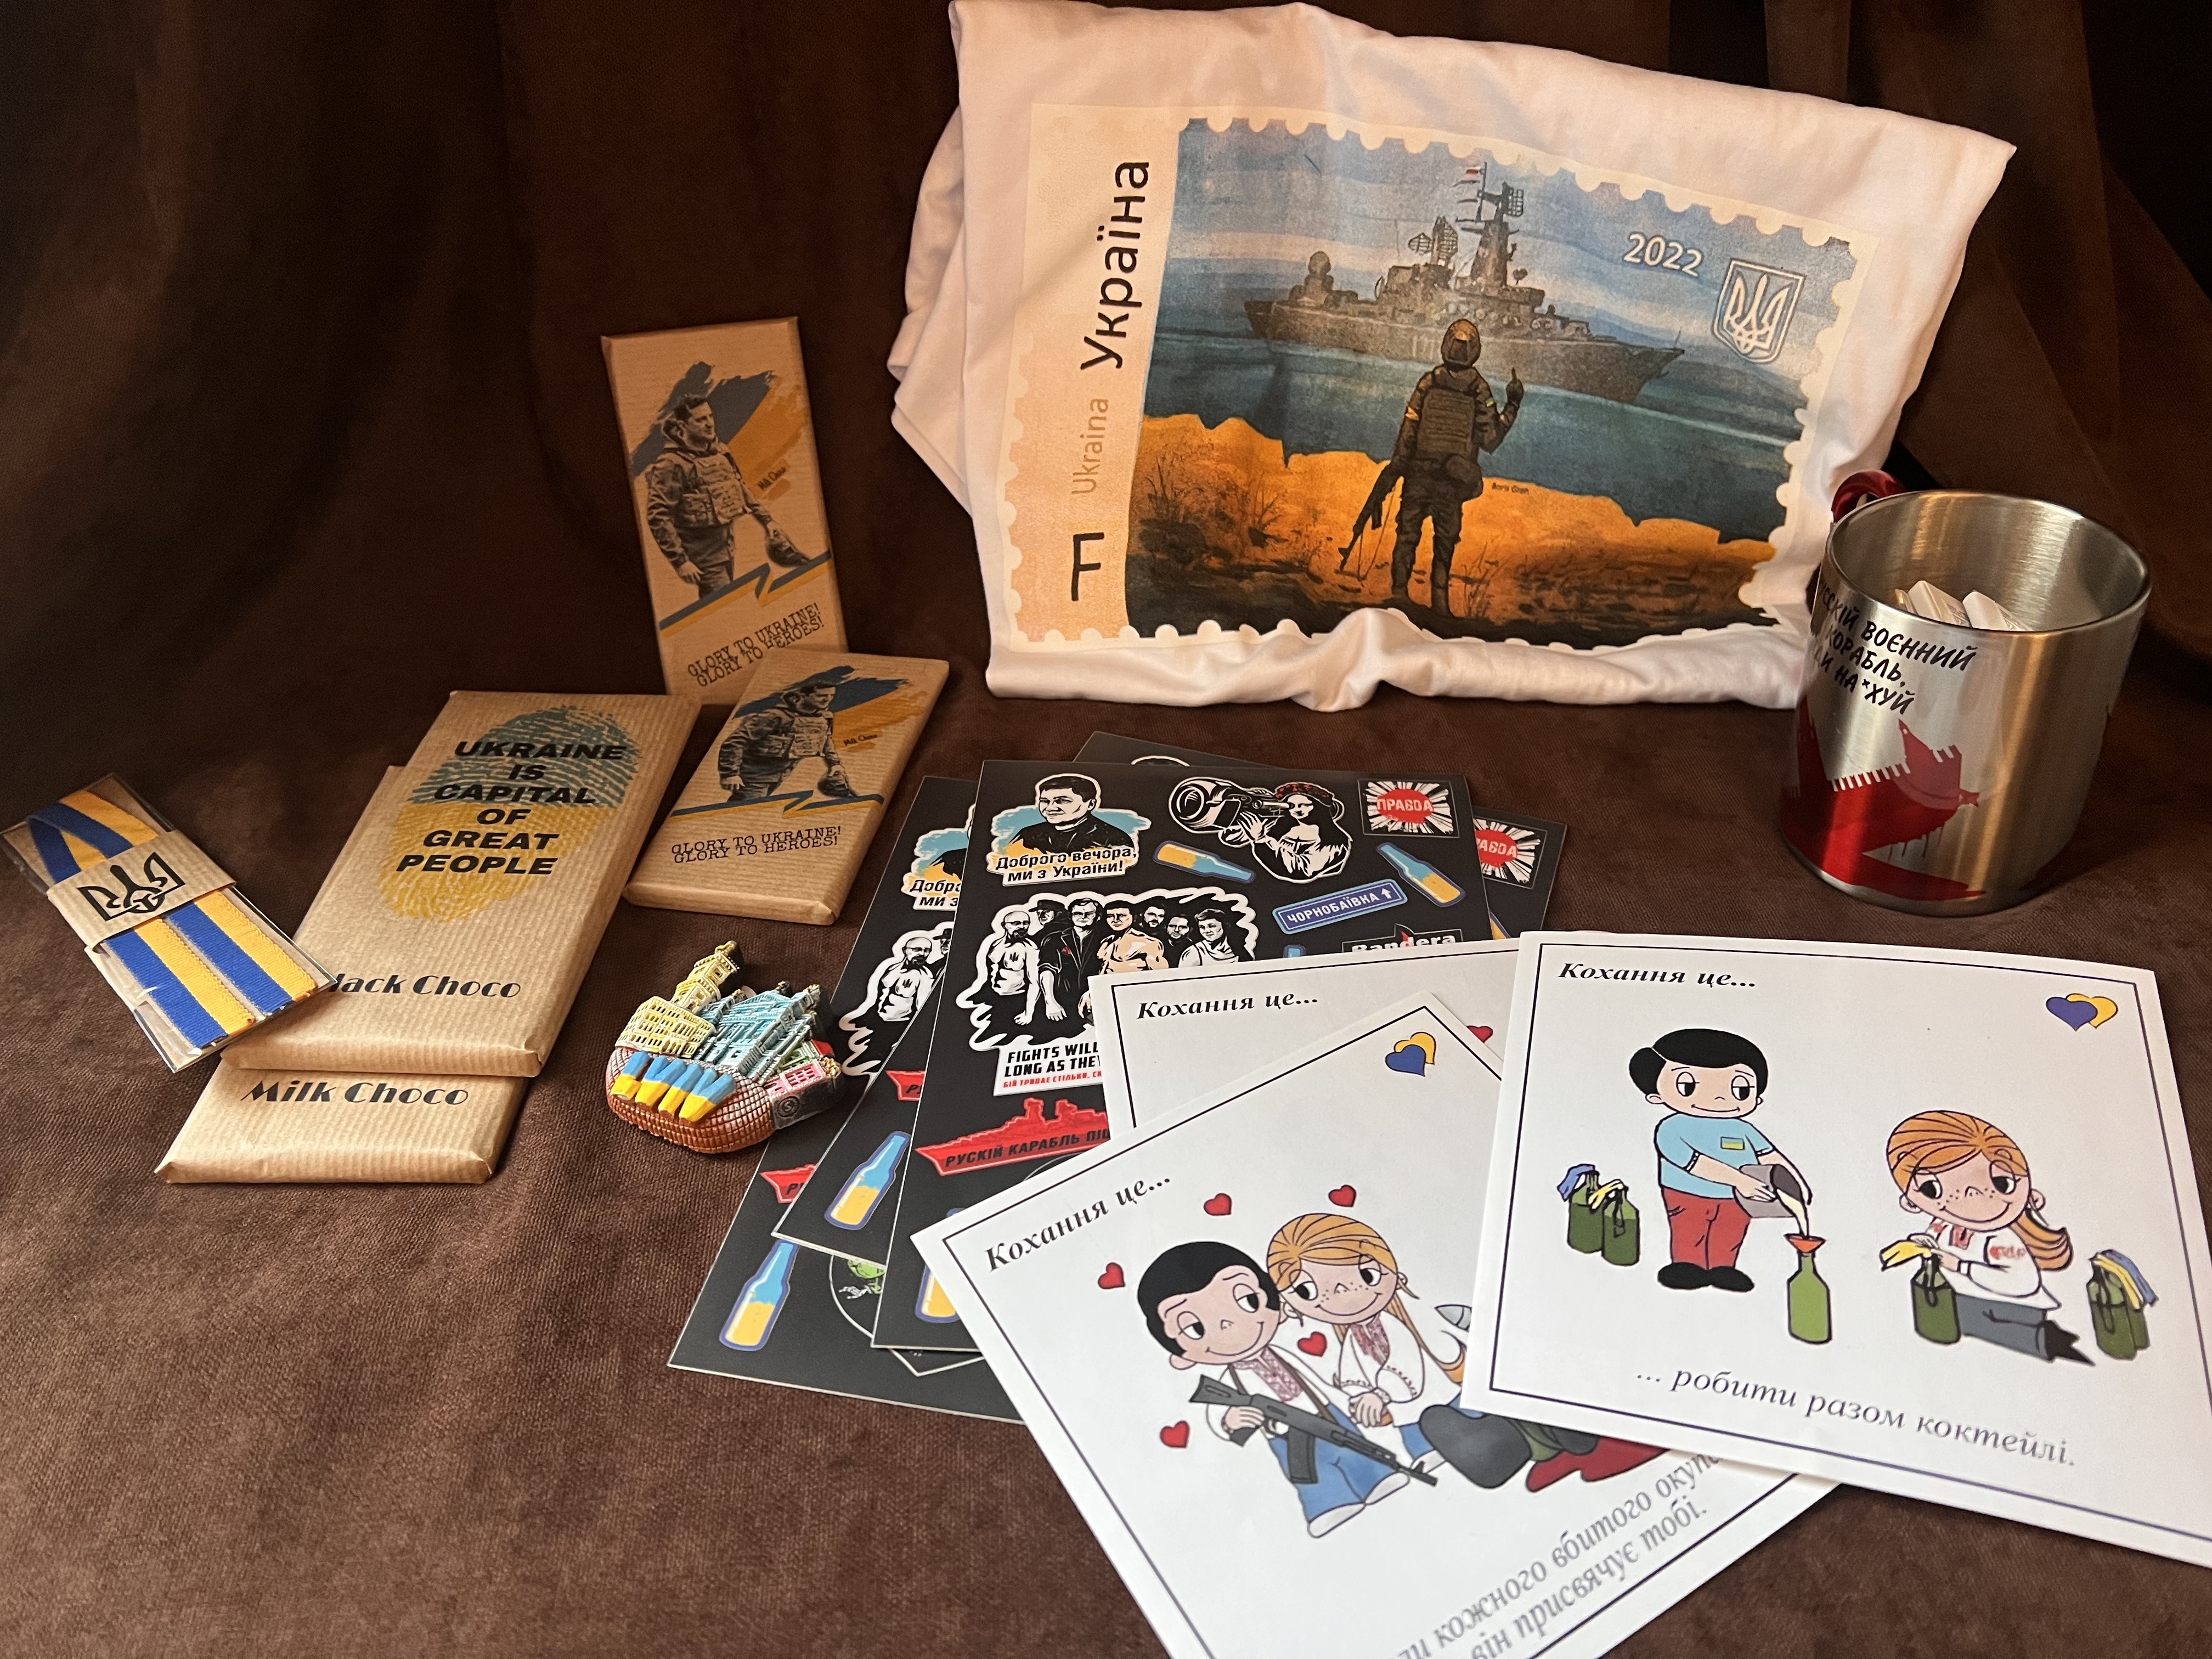 Chocolate with Ukrainian President Volodymyr Zelensky's image, a T-shirt featuring the Snake Island postage stamp and cards with a couple making a Molotov cocktail are available in a Lviv tourist shop.